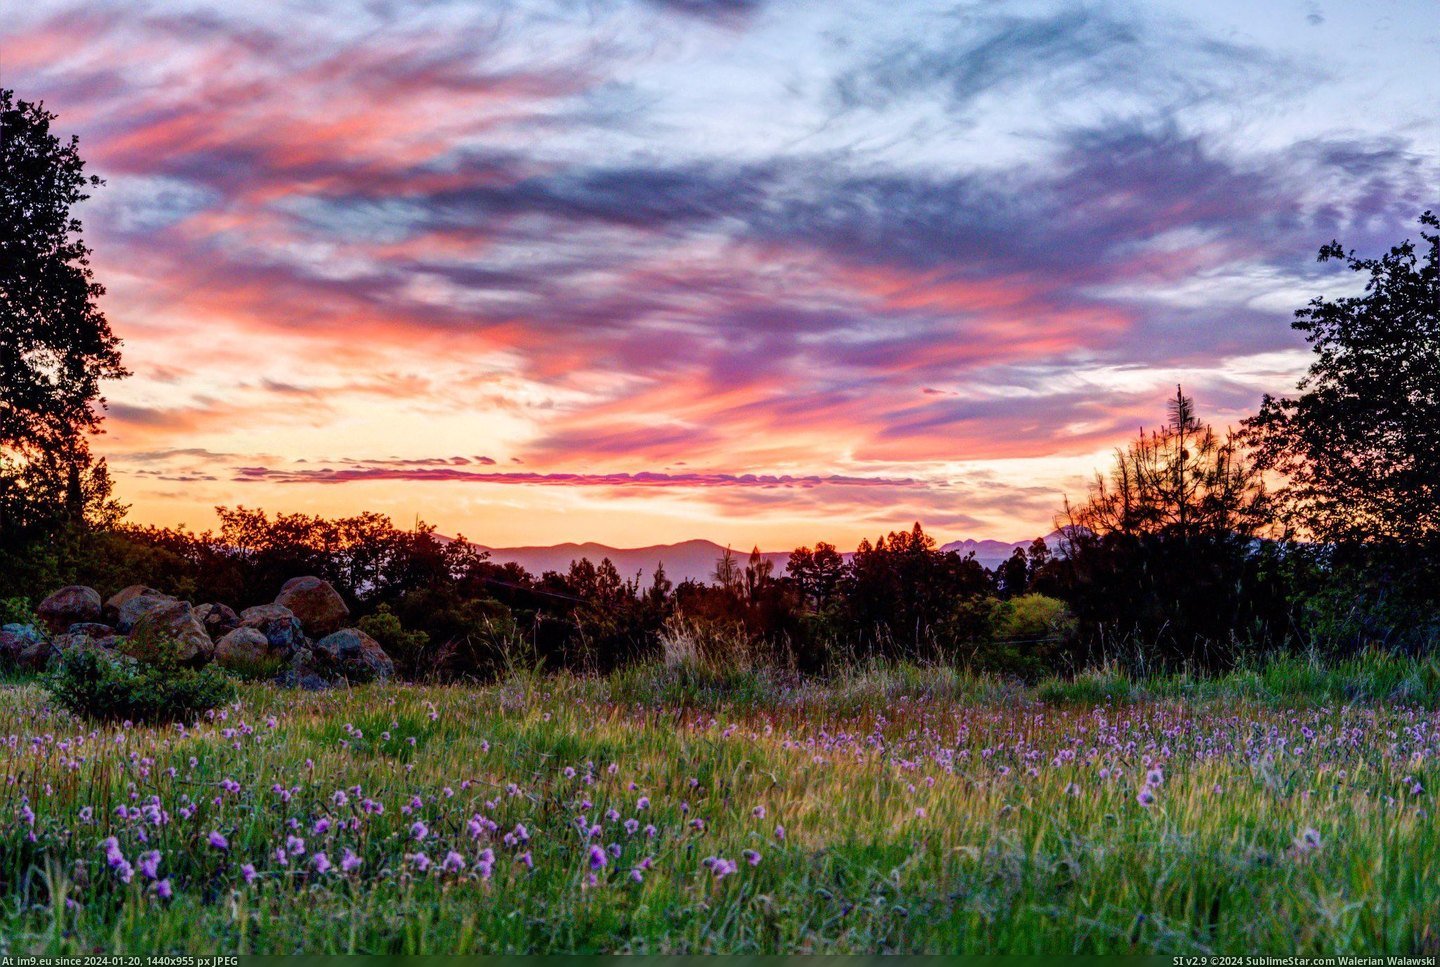 #One #Favorite #Backyard #Redding #California #Sunrise [Earthporn] One of my favorite sunrise pictures of my backyard in Redding California. [OC] [2048x1370] Pic. (Bild von album My r/EARTHPORN favs))